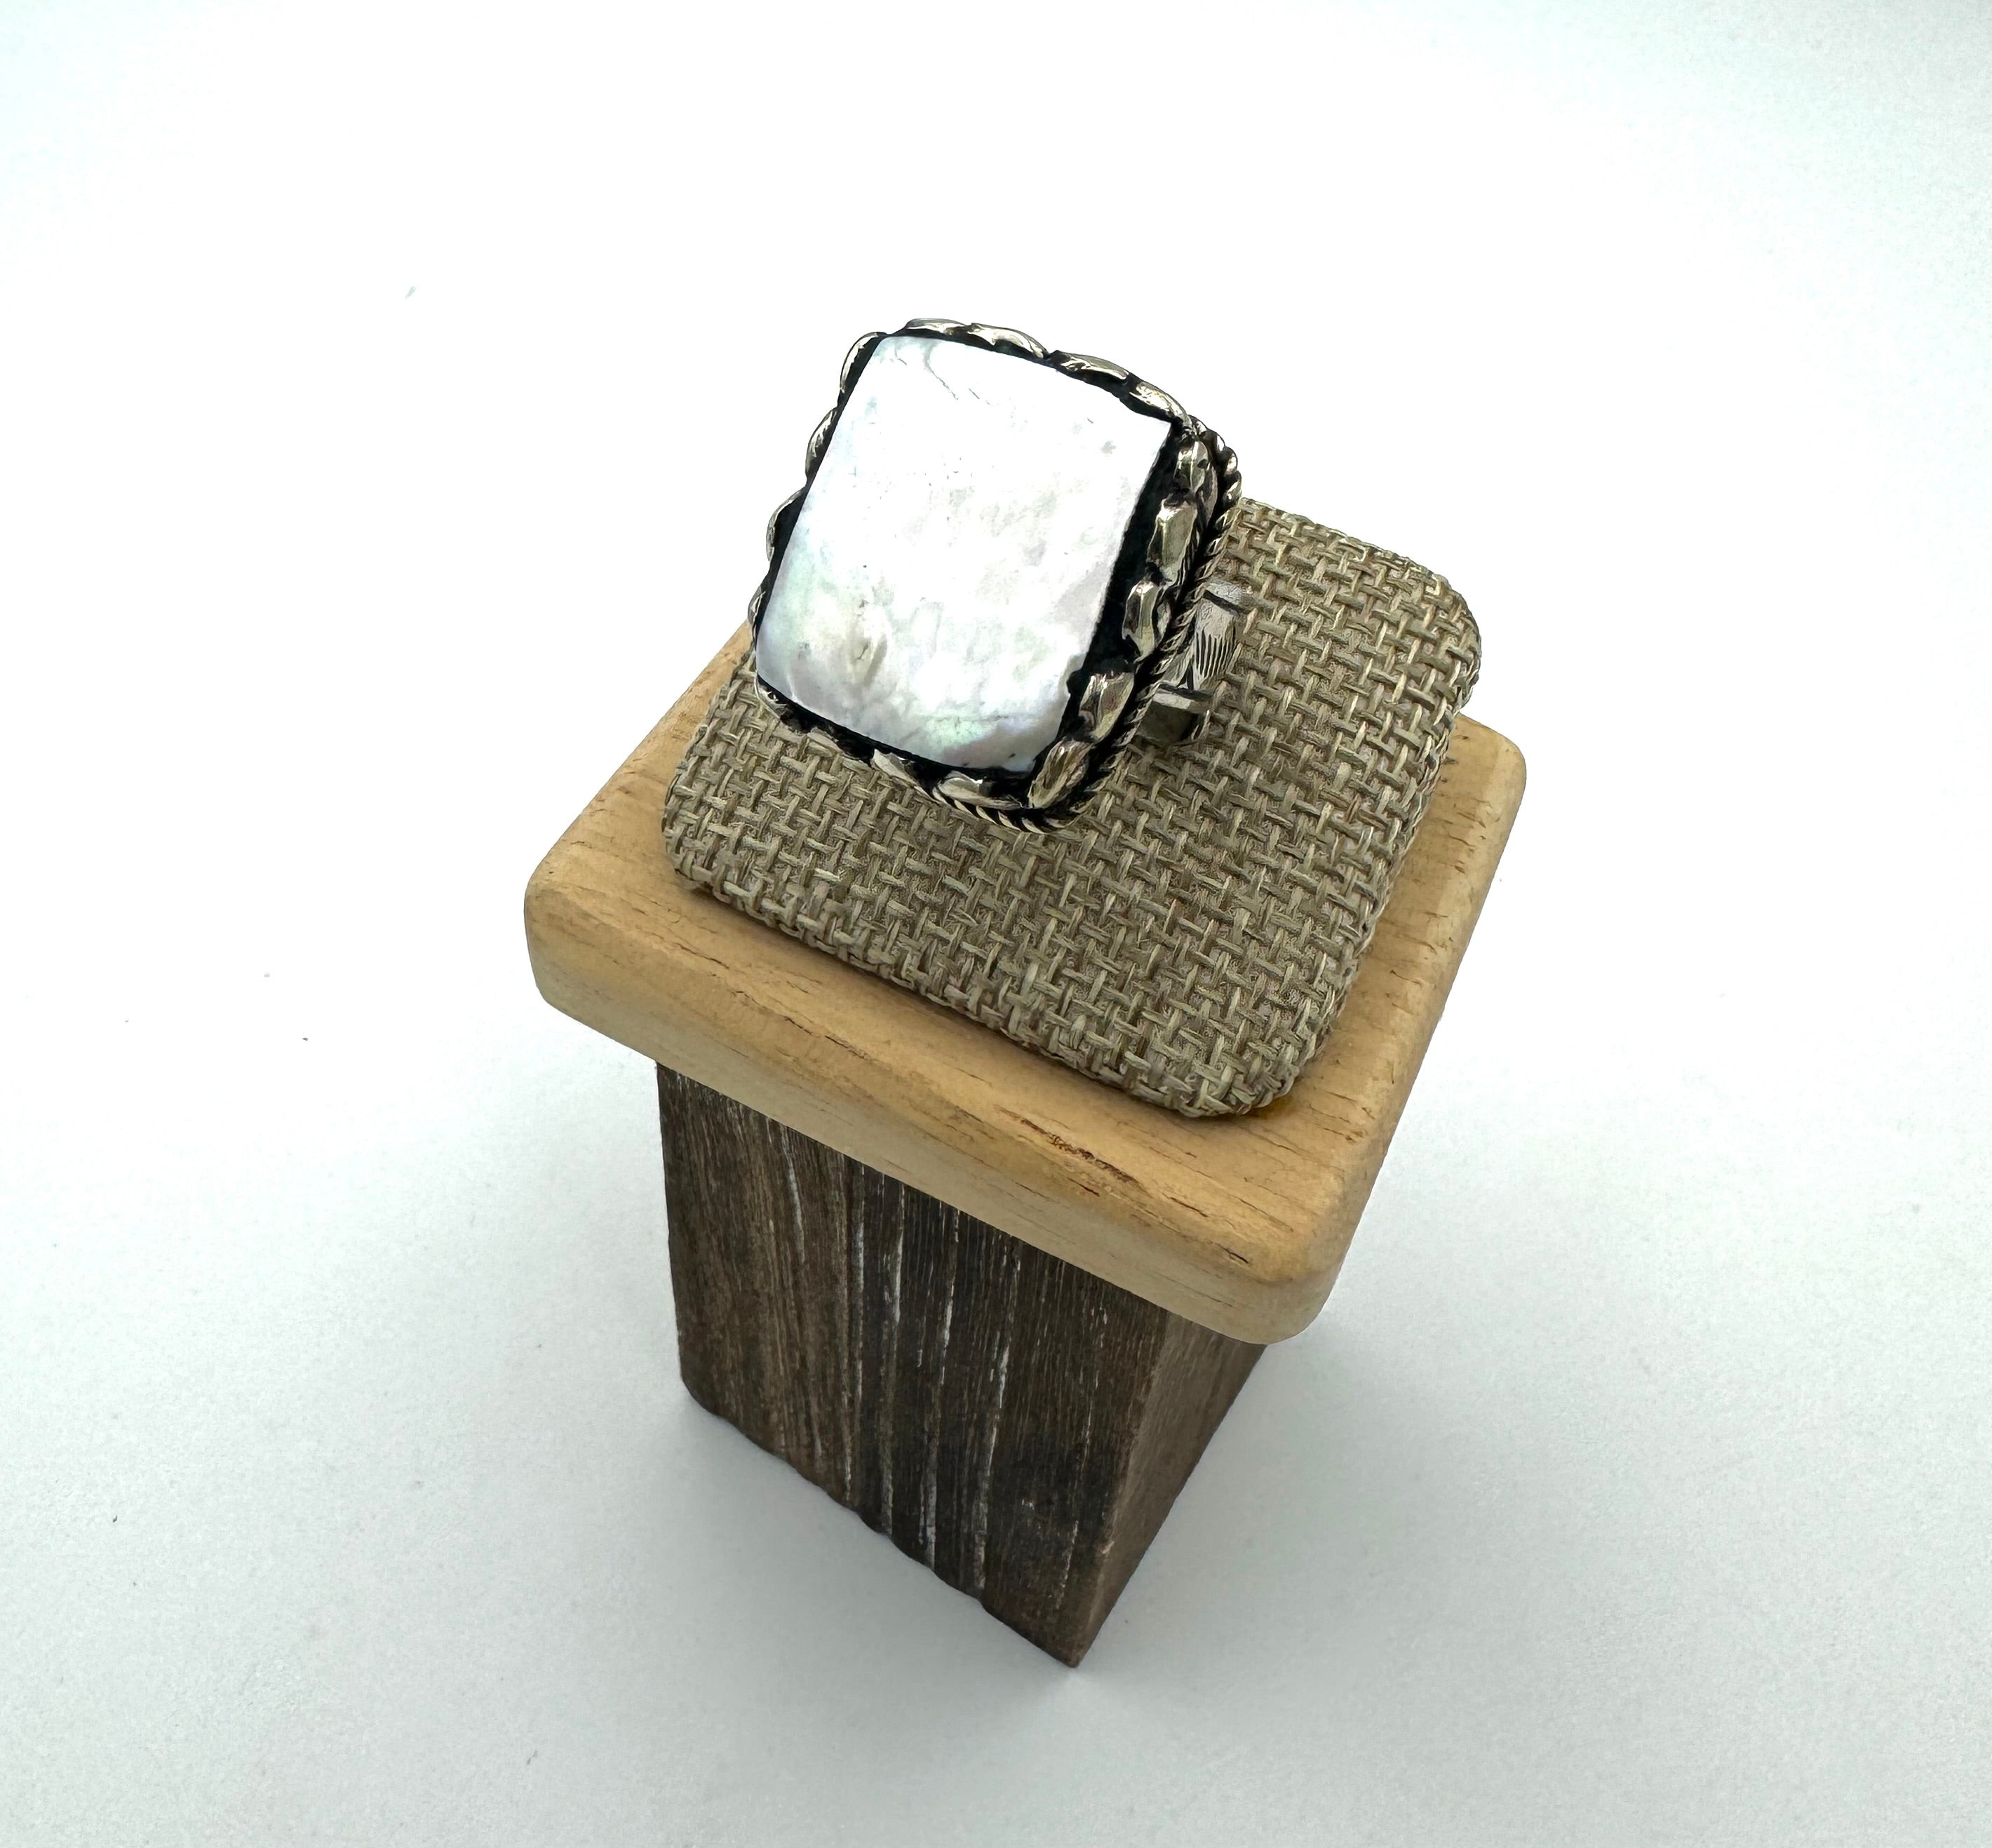 Square Pearl Ring